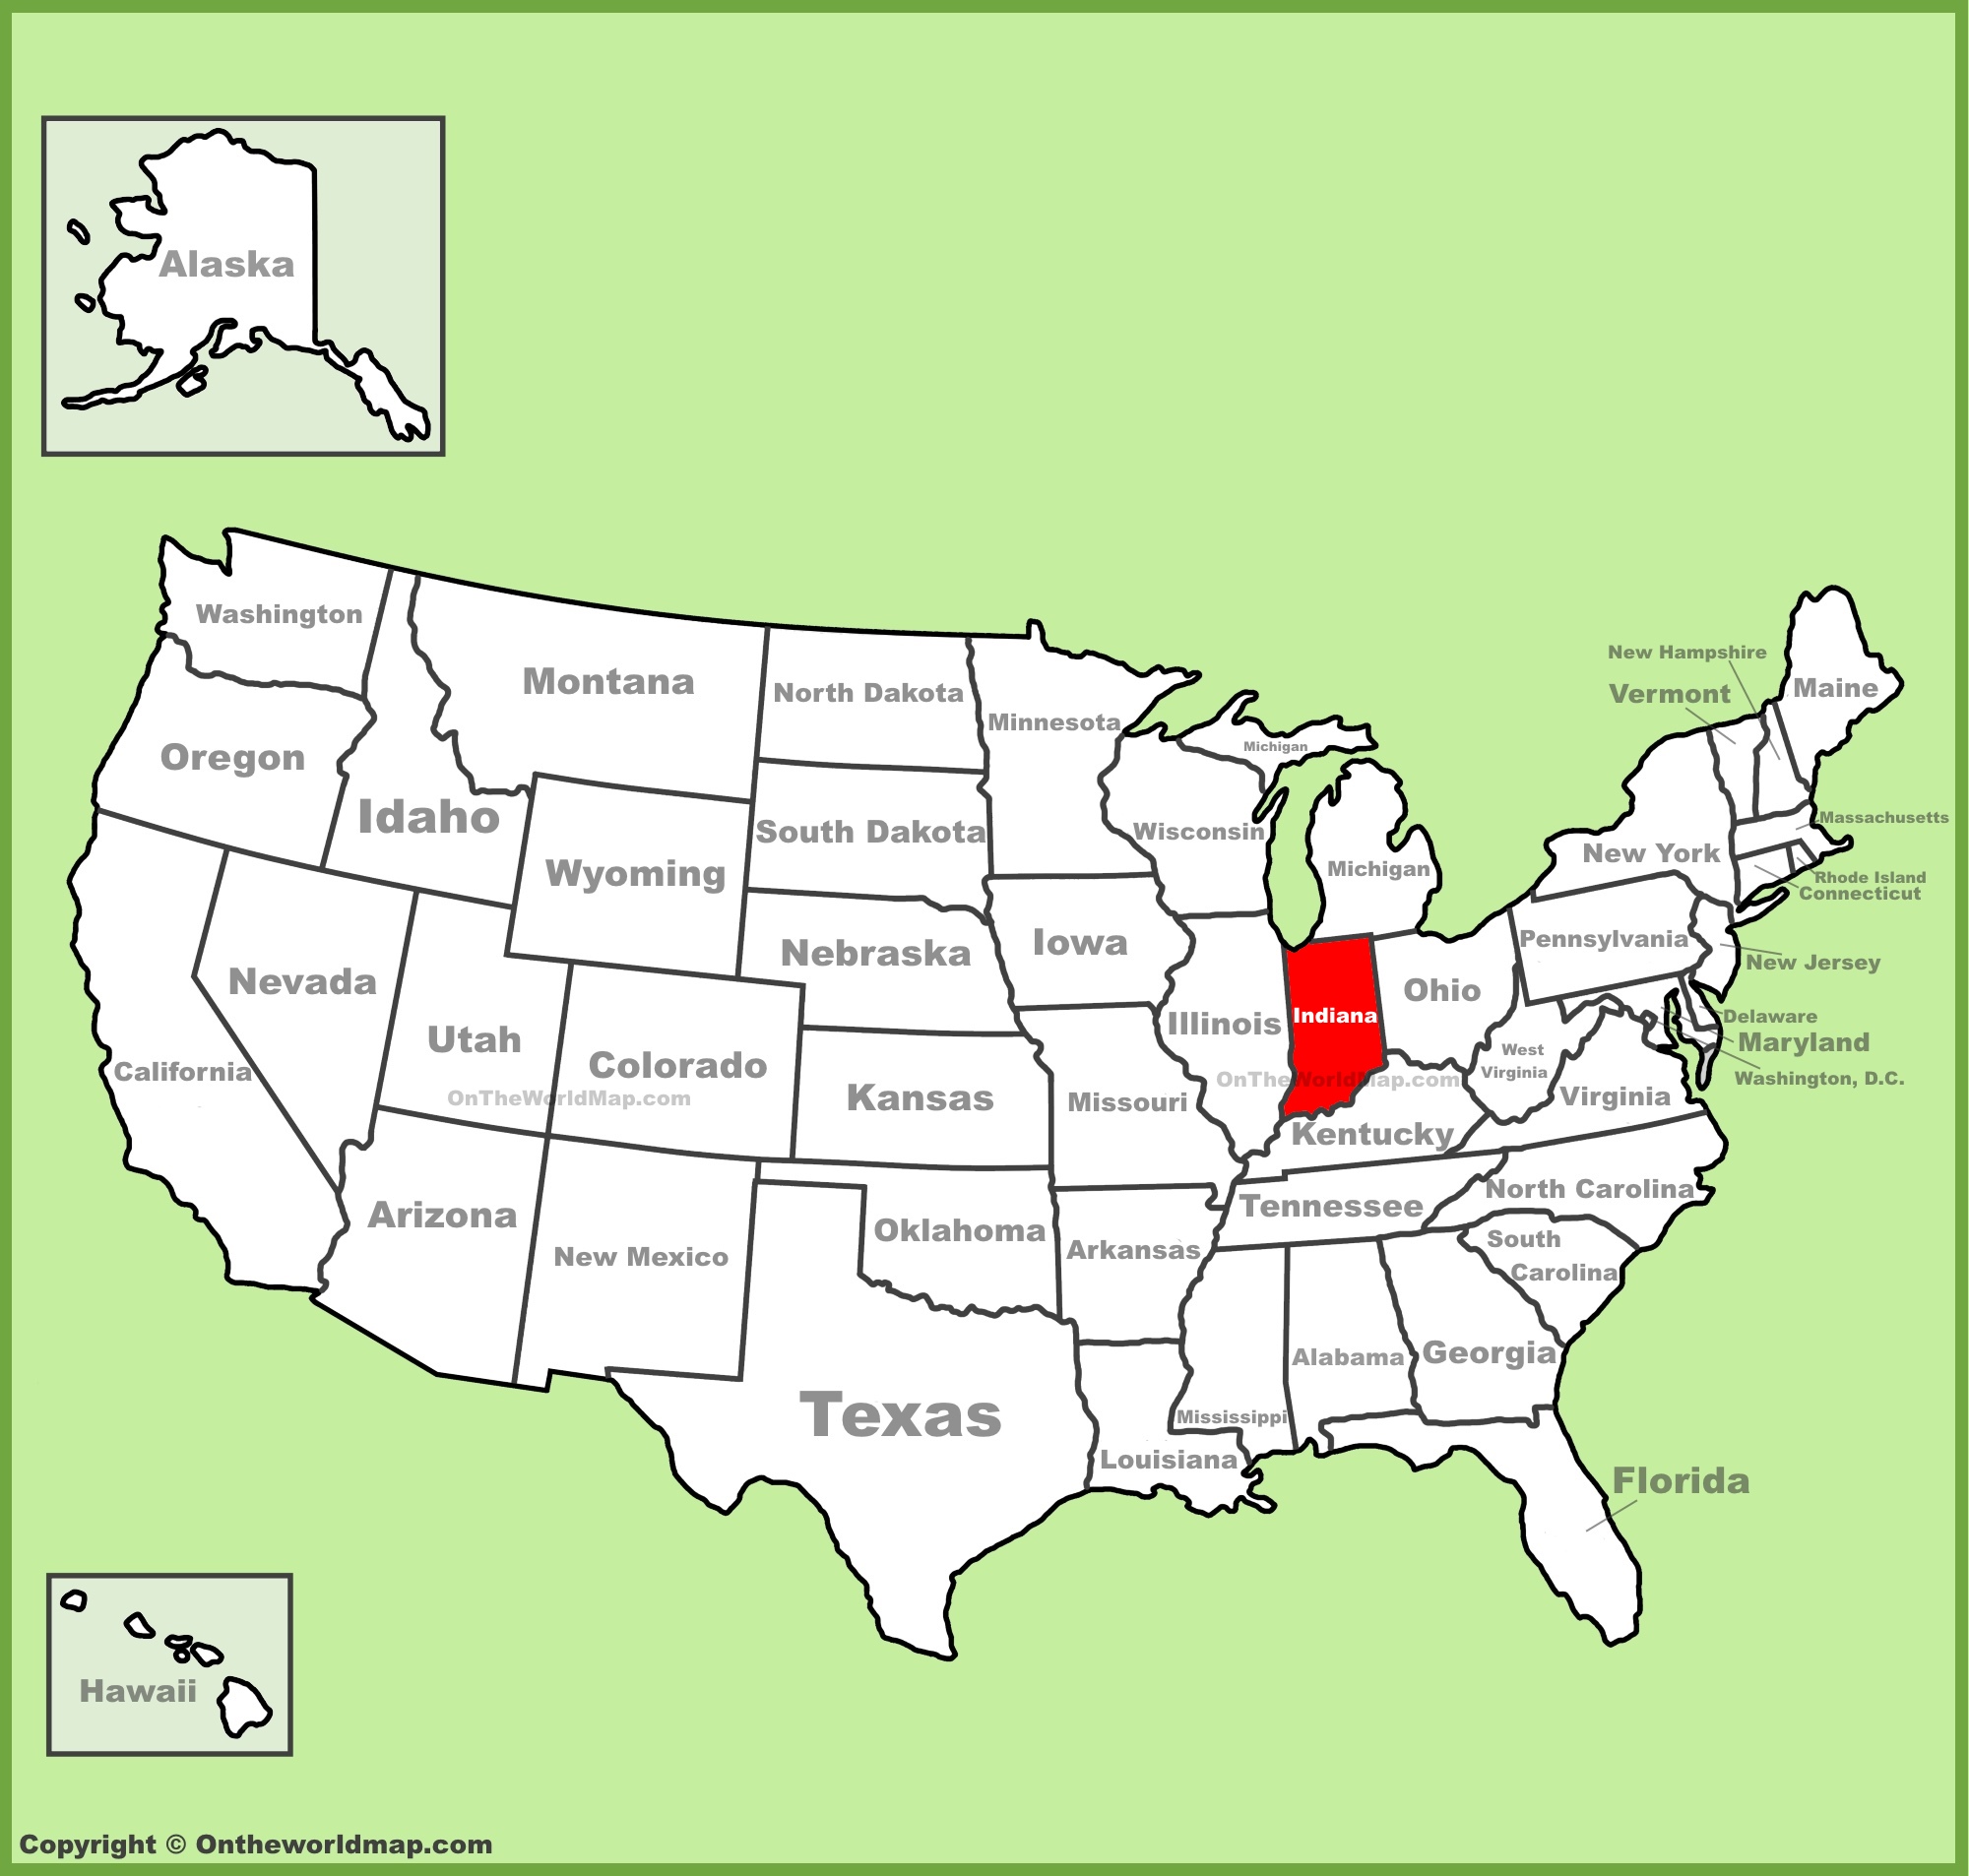 Indiana Location On The U S Map